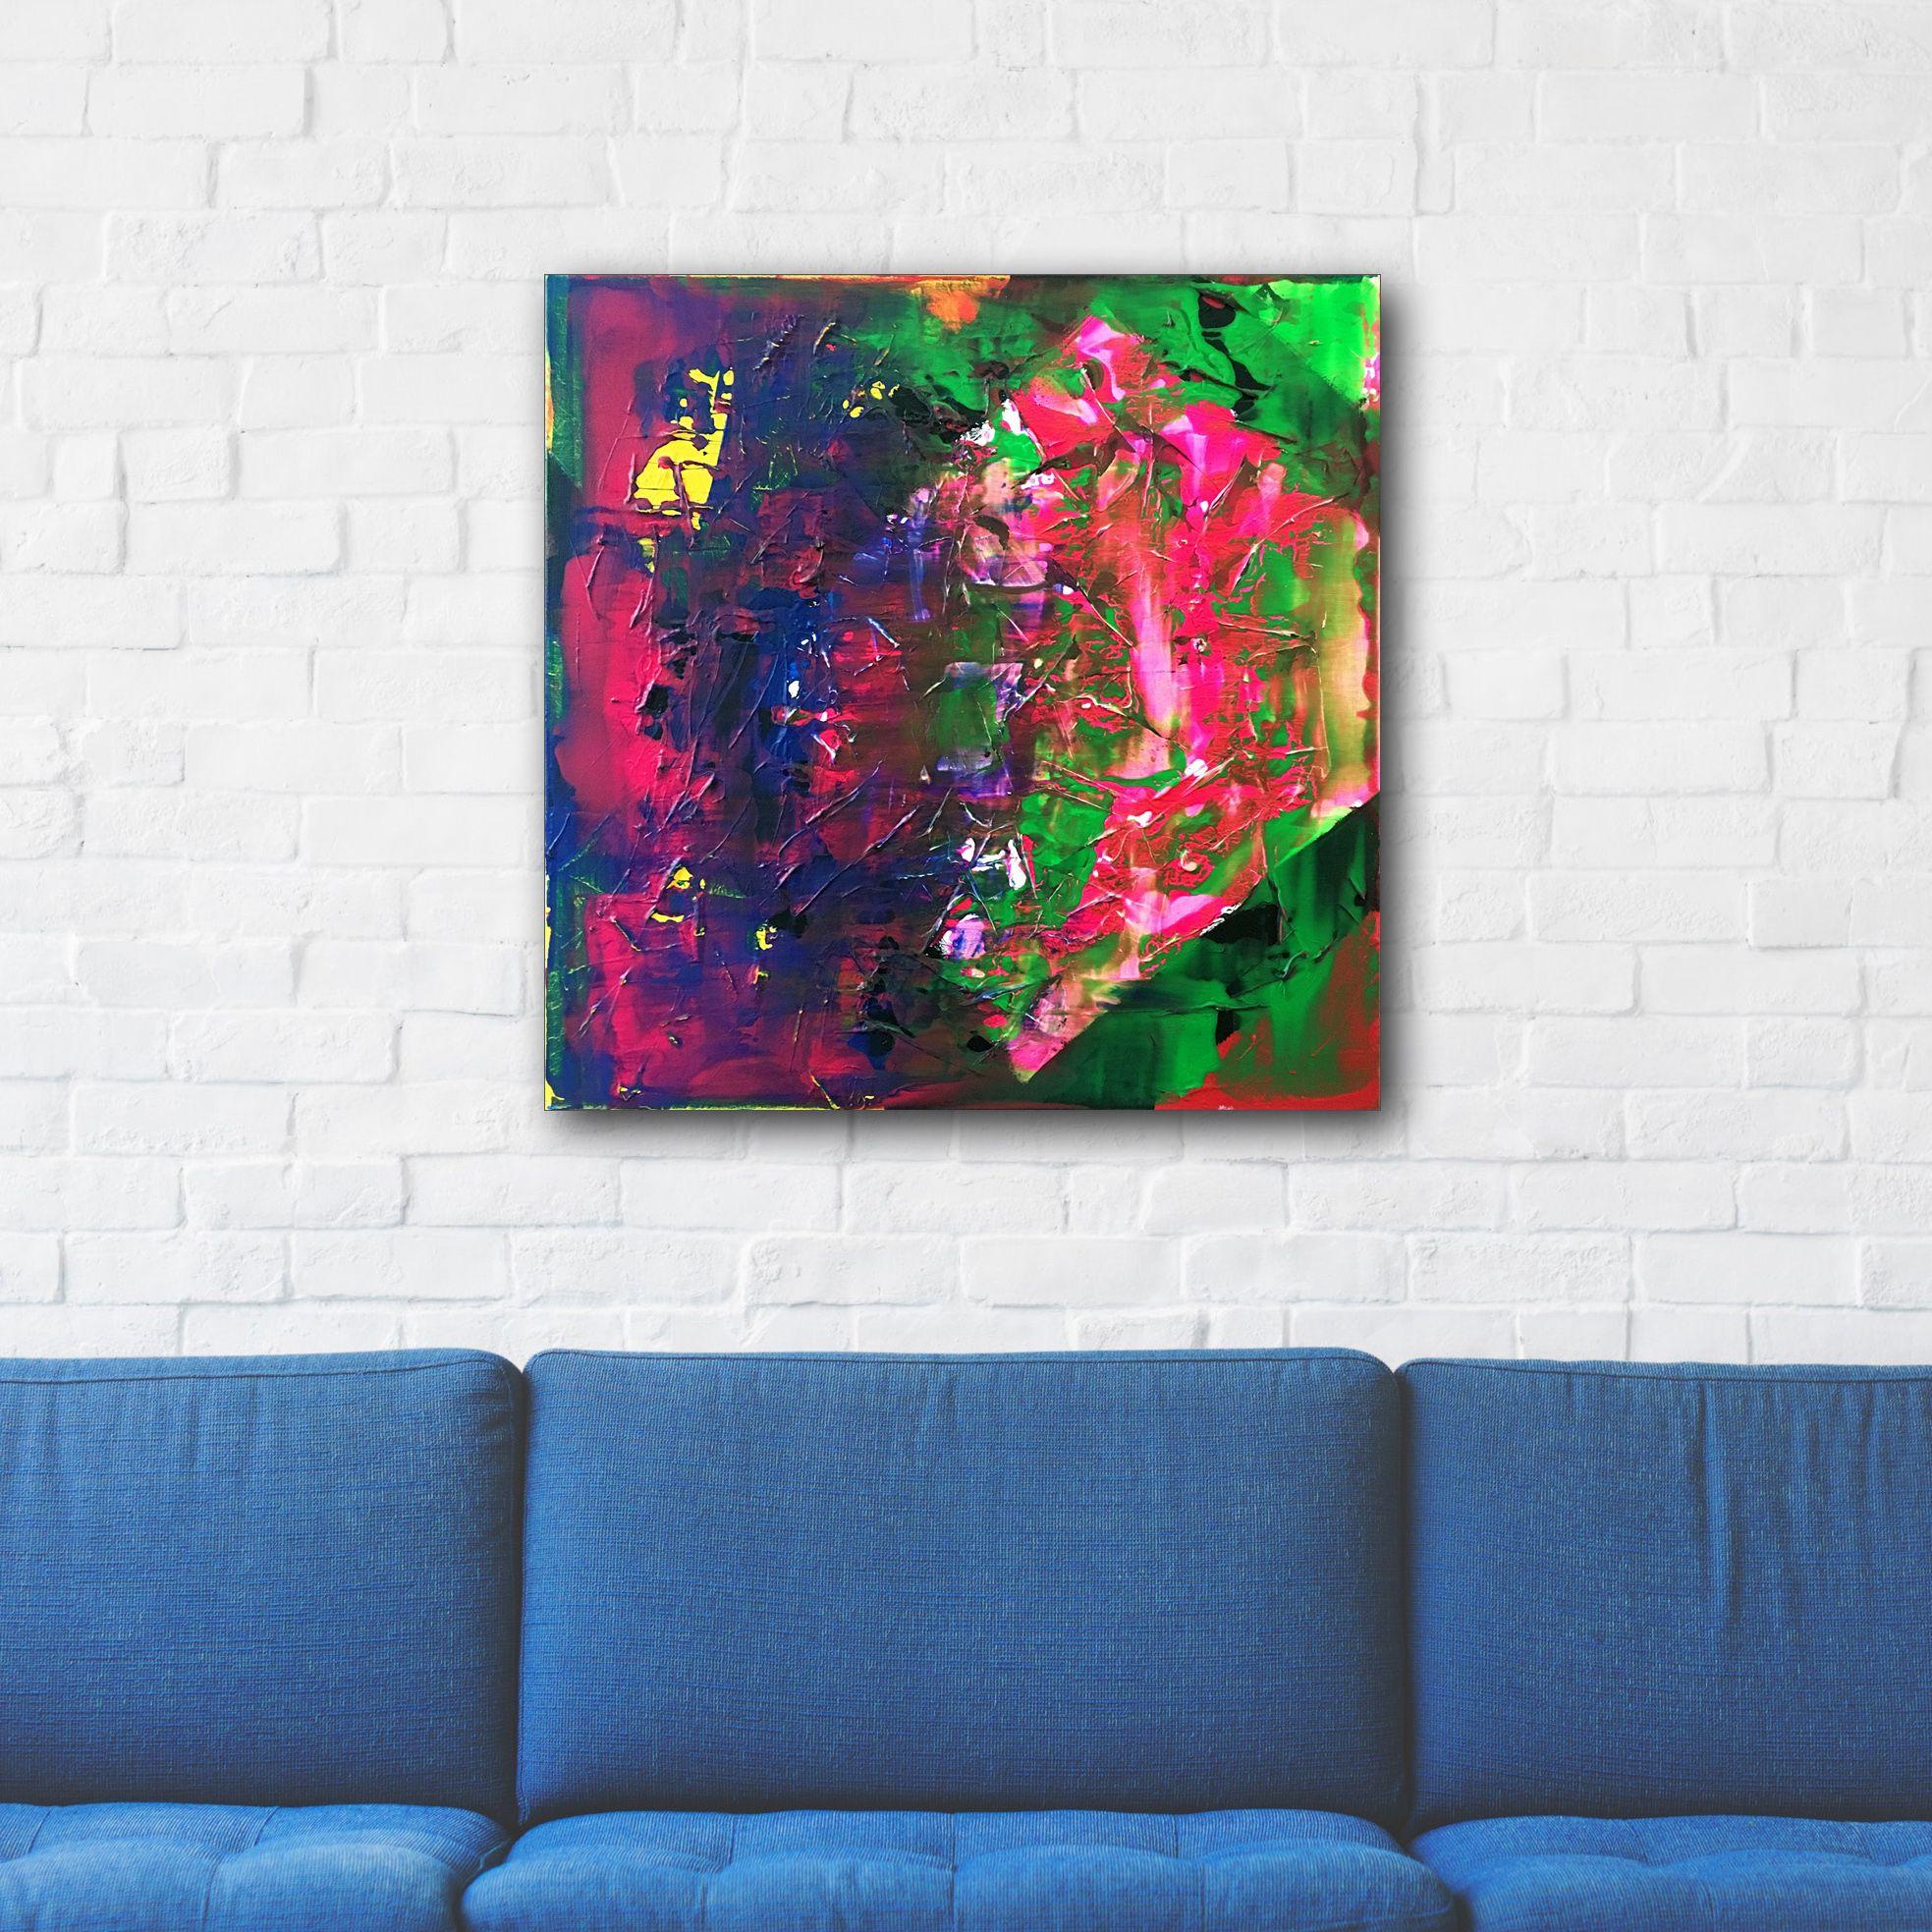 This is a gallery quality, PMS abstract acrylic painting for your home or office. It was painted with the highest quality materials and will make a statement in your space. It part of a new series and is a multi-layered acrylic piece that is